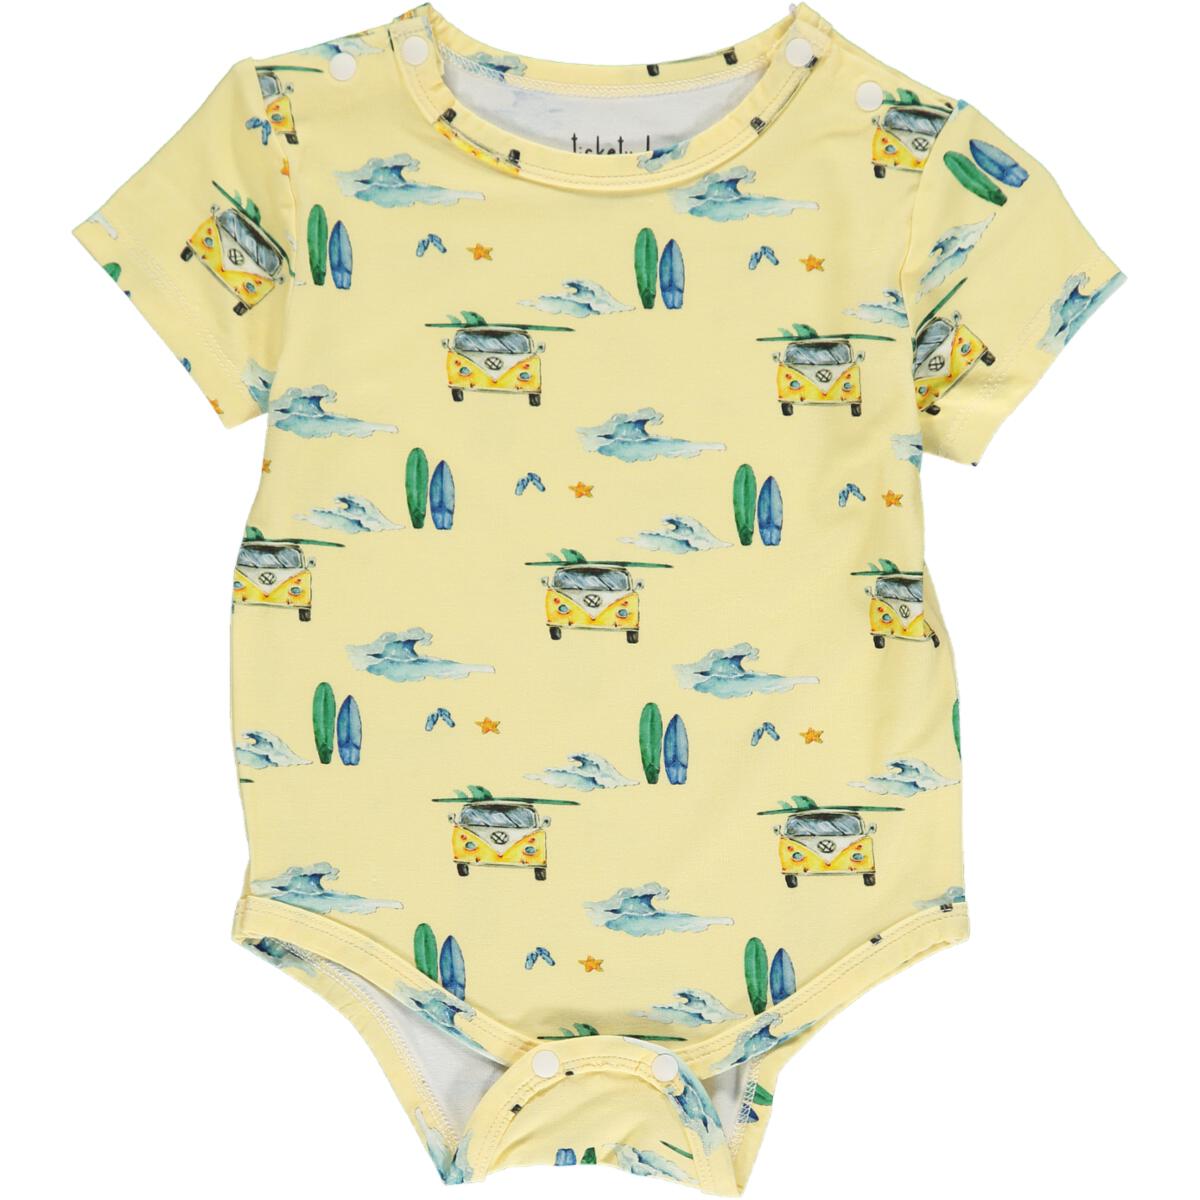 Tickety Boo Classic Onesie - Multiple Prints